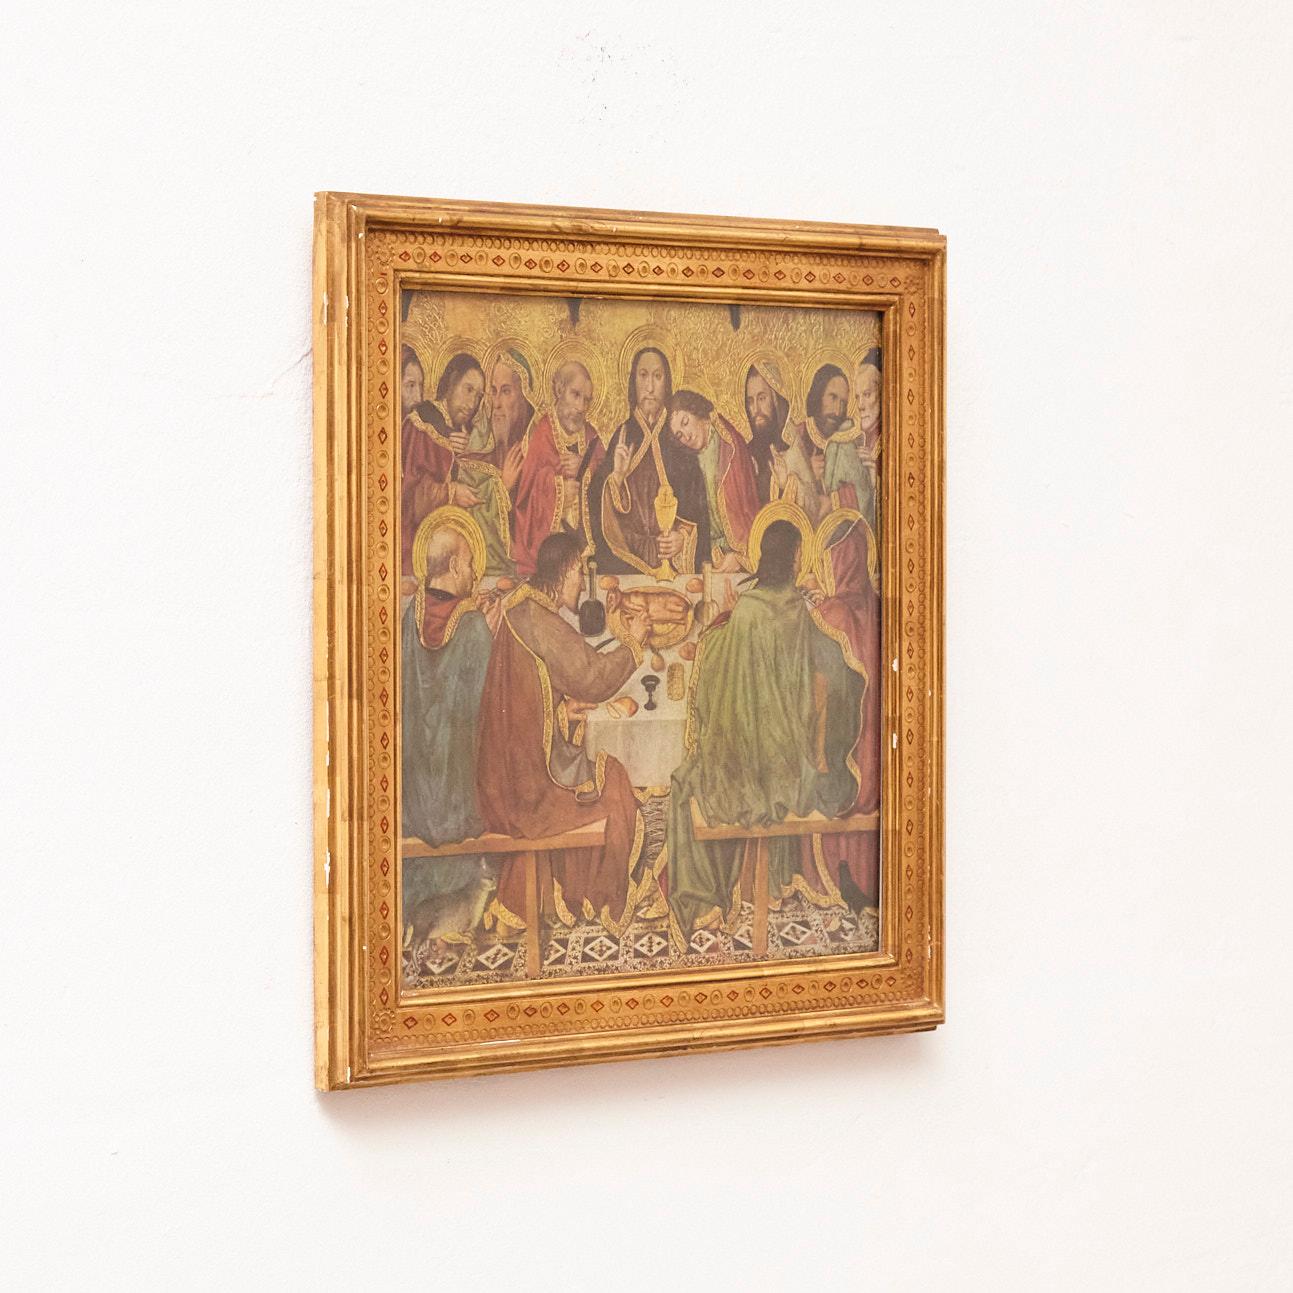 Manufactured France, circa 1950.

Materials:
Wood, paper.

Dimensions: 
D 2,5 x W 37,5 cm x H 37,5 cm

The artwork is in its original condition, showing minor signs of wear consistent with its age and use. These imperfections contribute to the